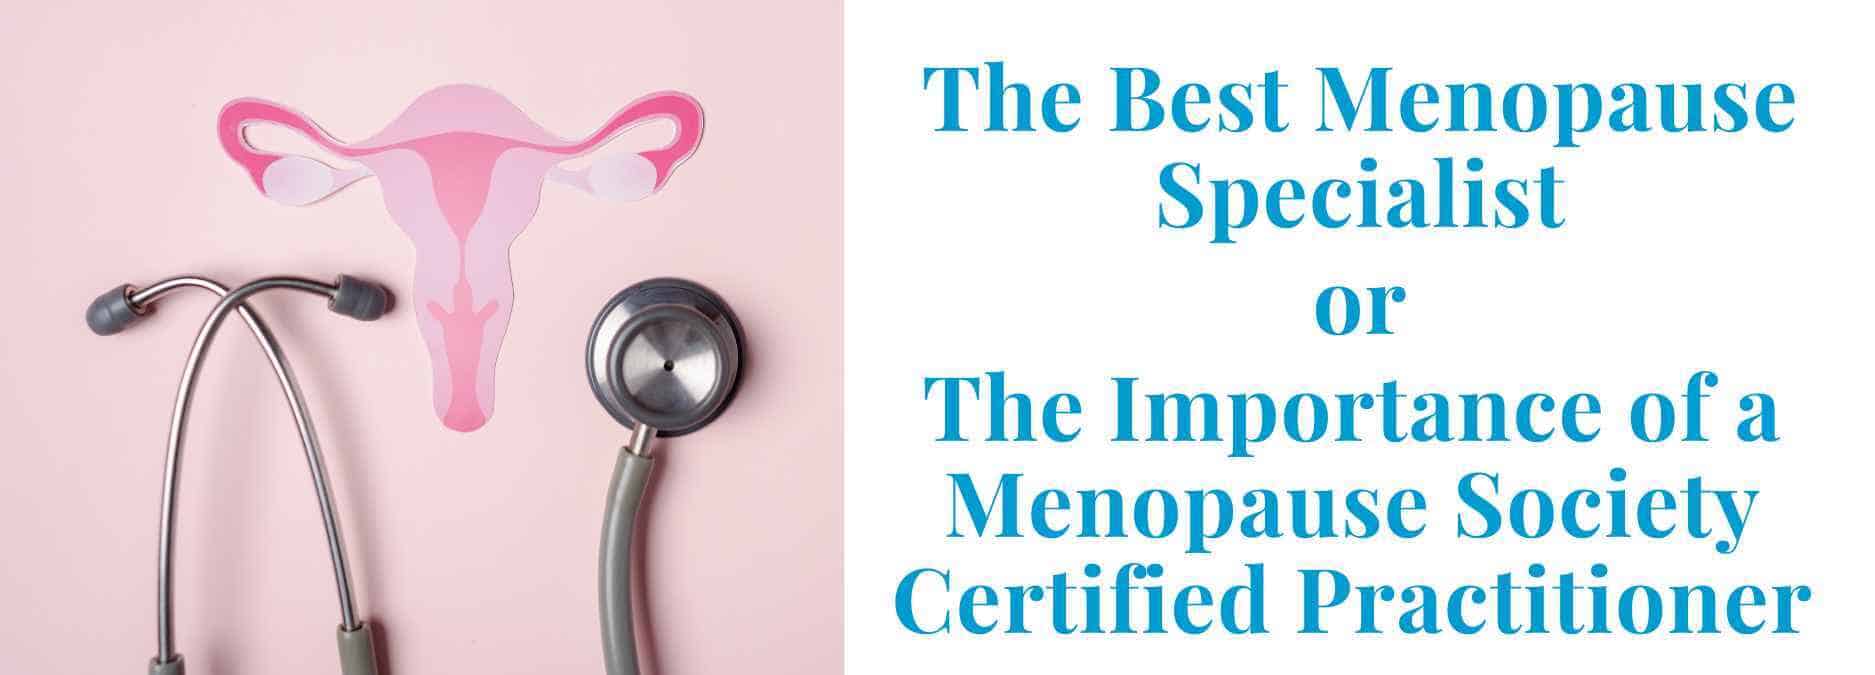 The best menopause specialist ot the importance of menopause society certified practitioners